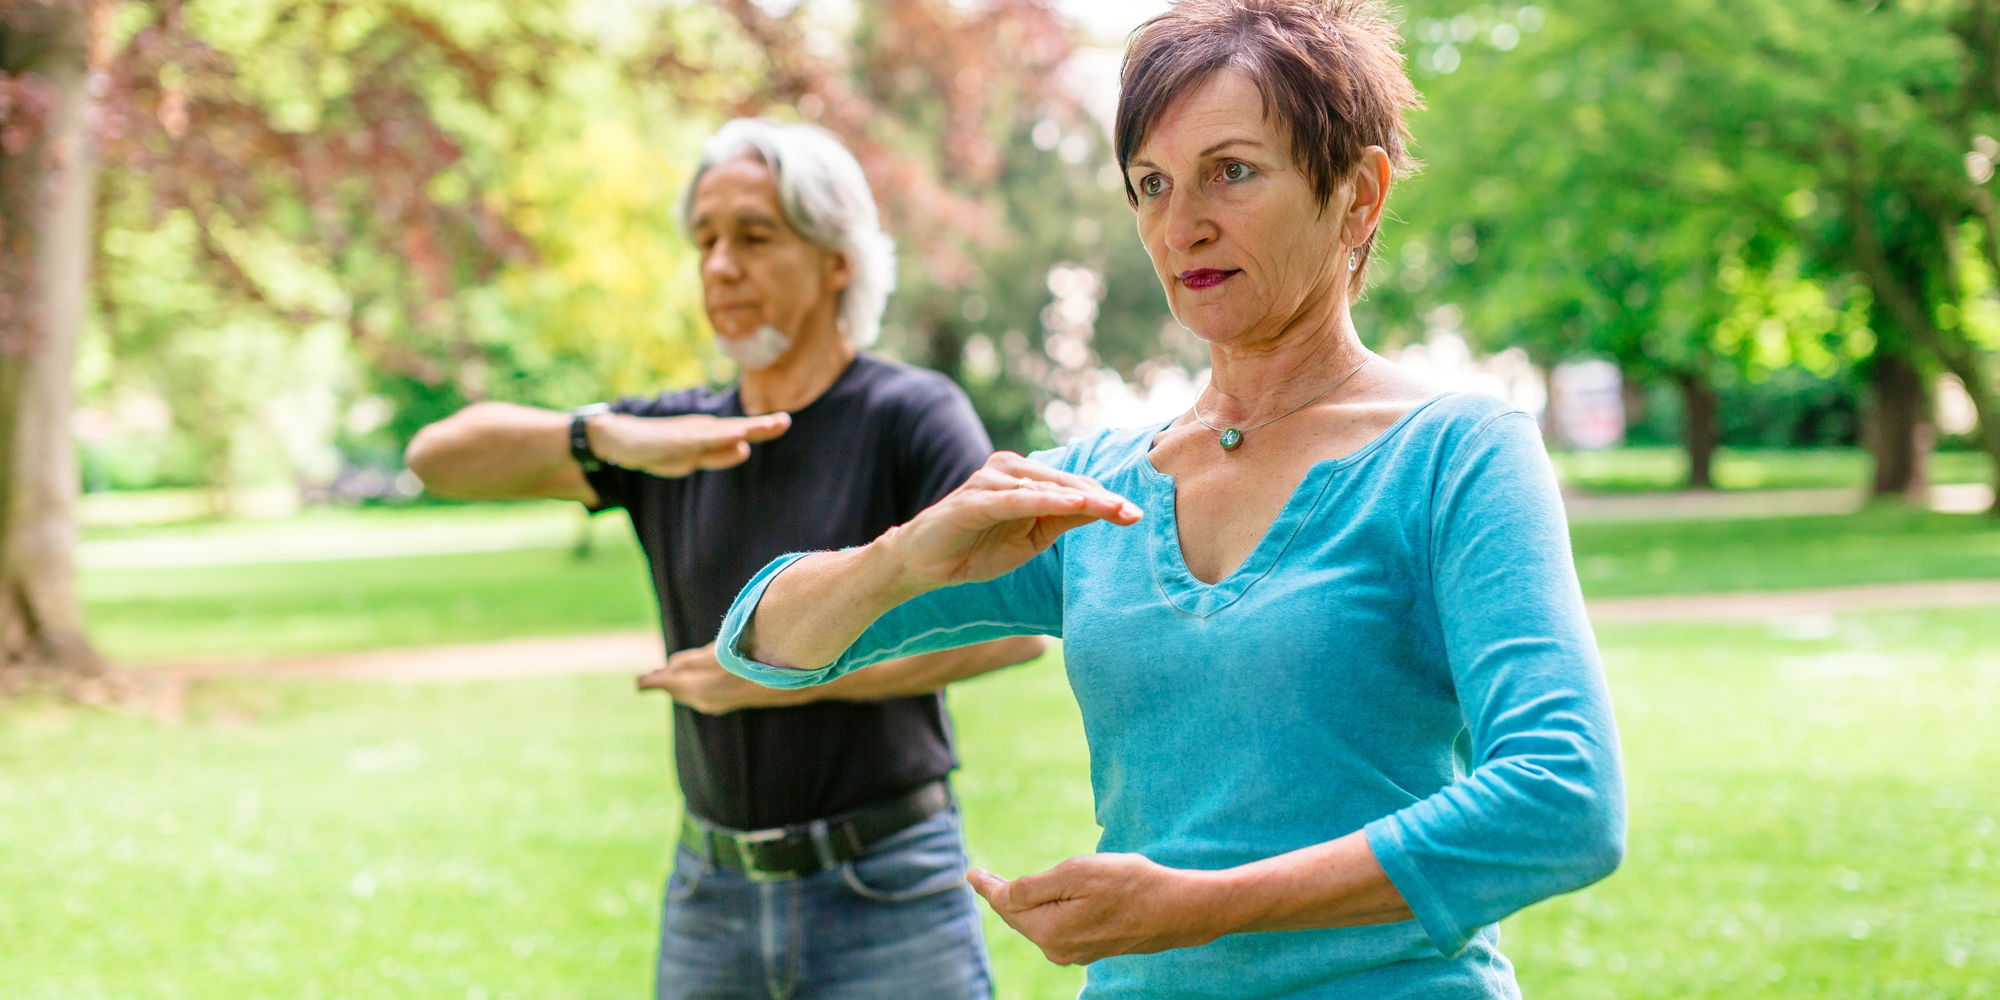 Qigong: Cultivate the Fire Within - Qigong for Energy promotional image